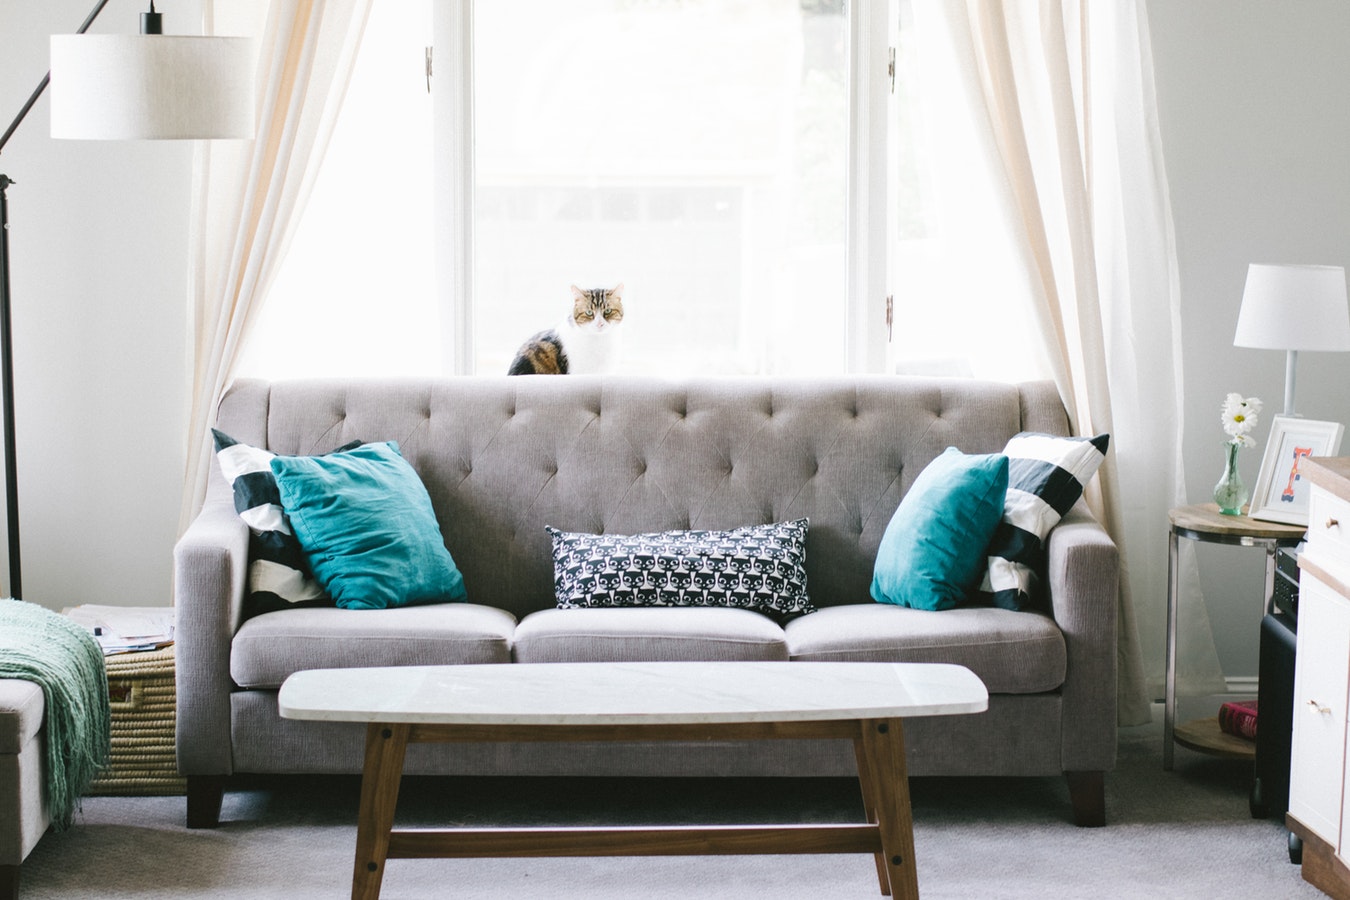 Vintage Decor Tips: What Trendy Homeowners Should Know